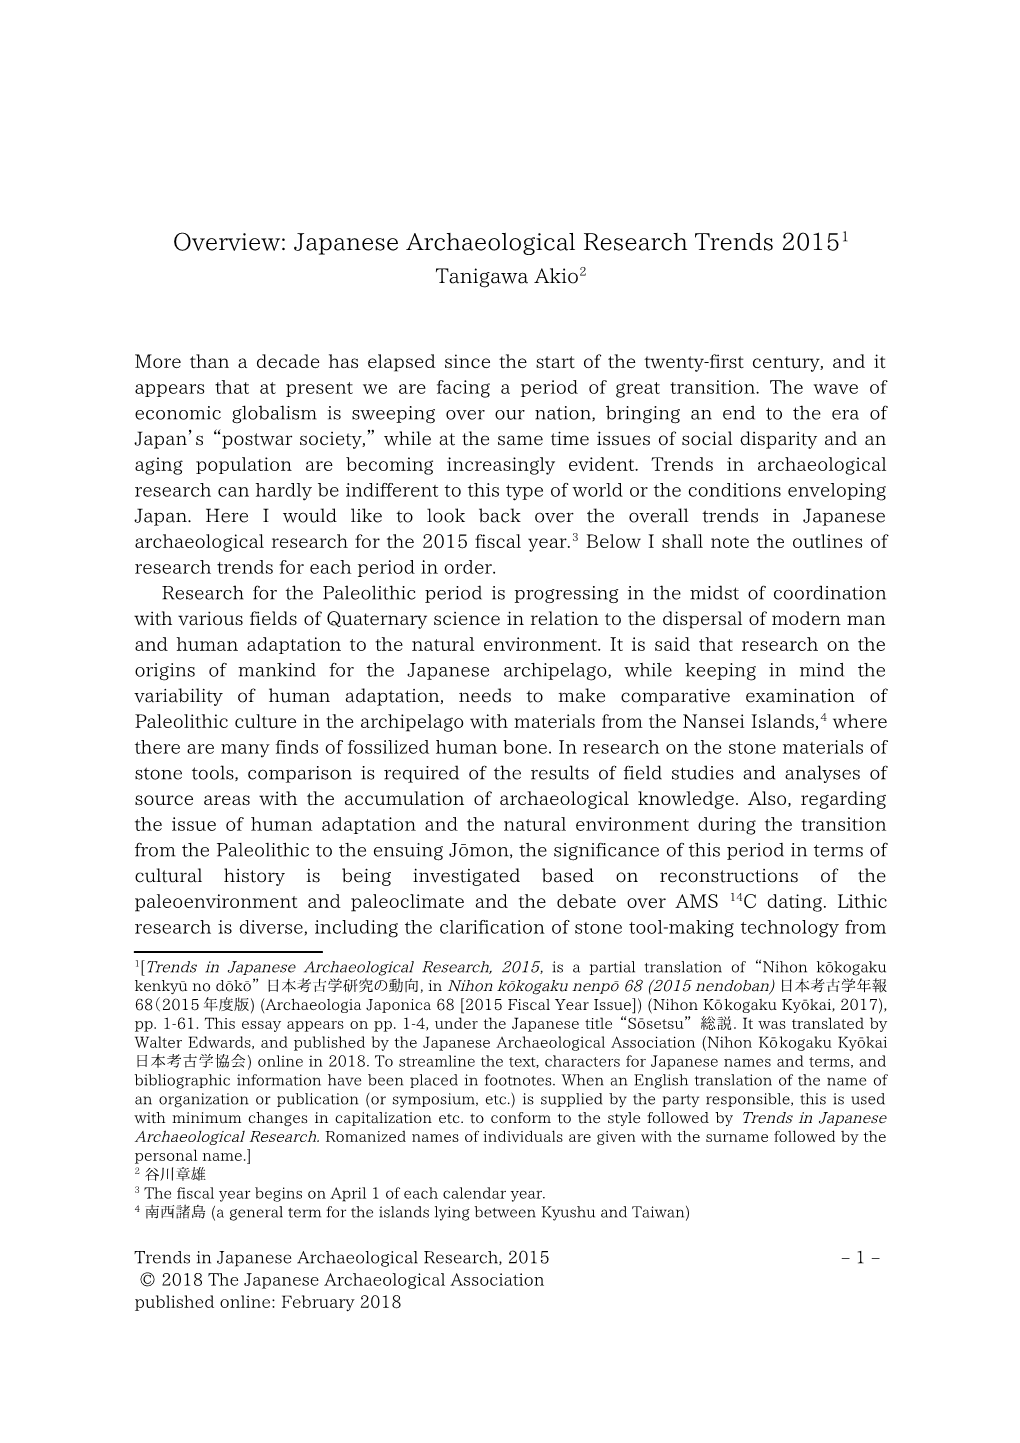 Overview: Japanese Archaeological Research Trends 20151 Tanigawa Akio2